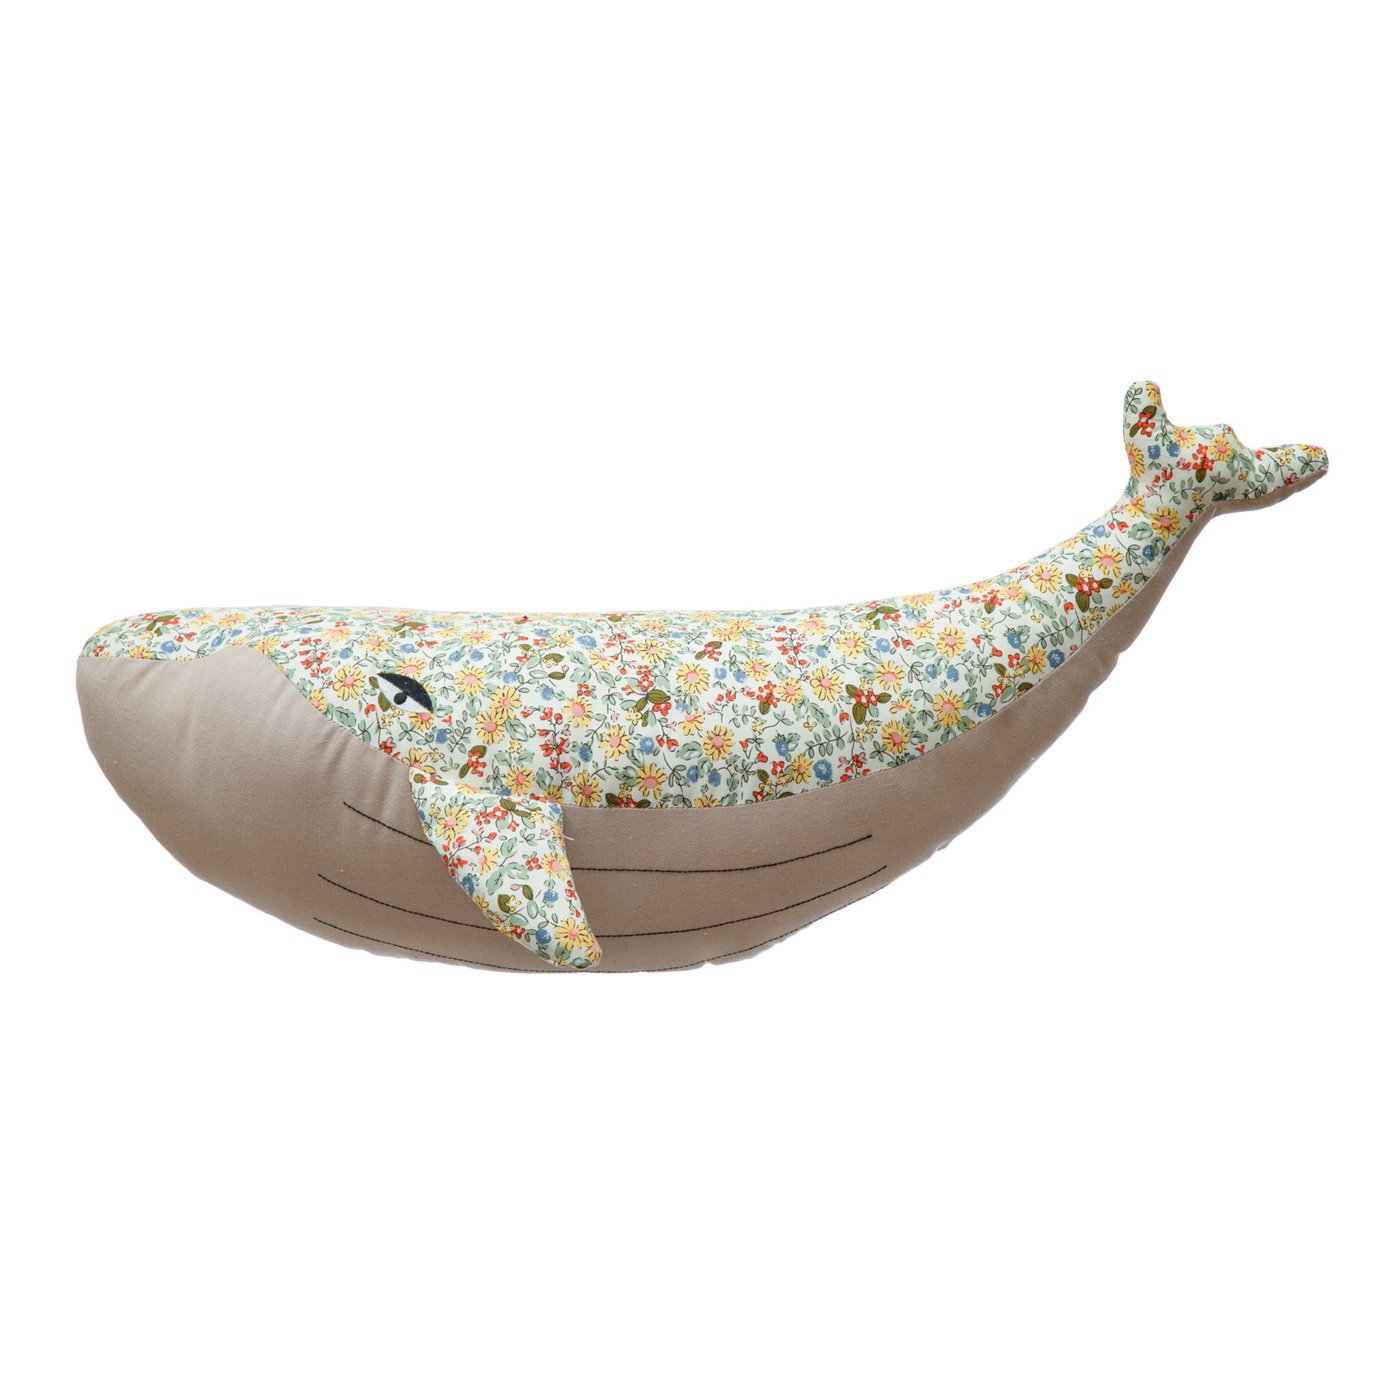 Plush Whale with Floral Print Fabric, Multi Color